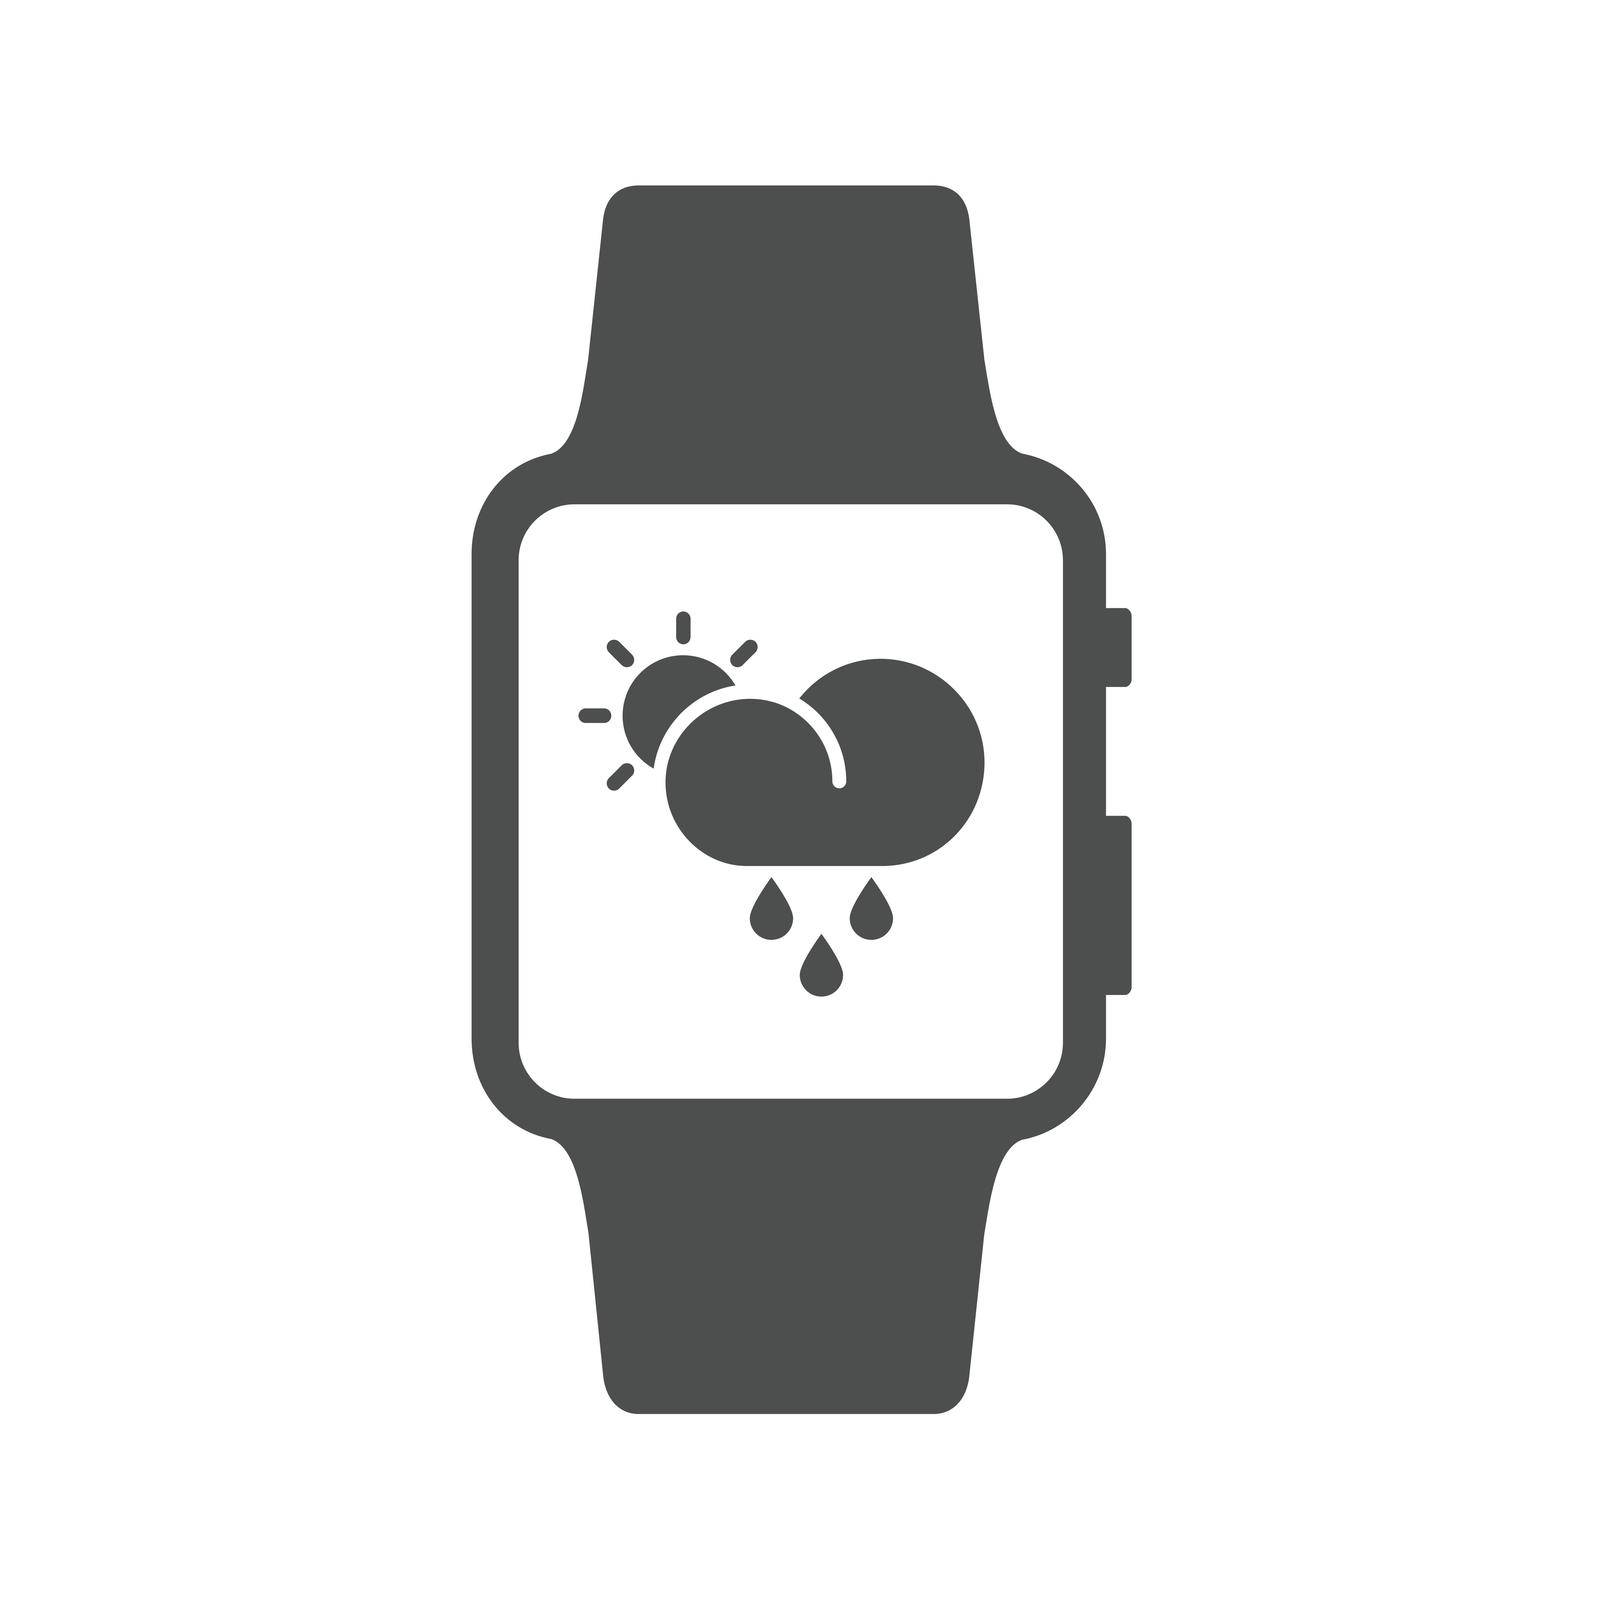 weather forecast on smart watch vector icon isolated on white background. web icon for mobile and ui design by govindamadhava108